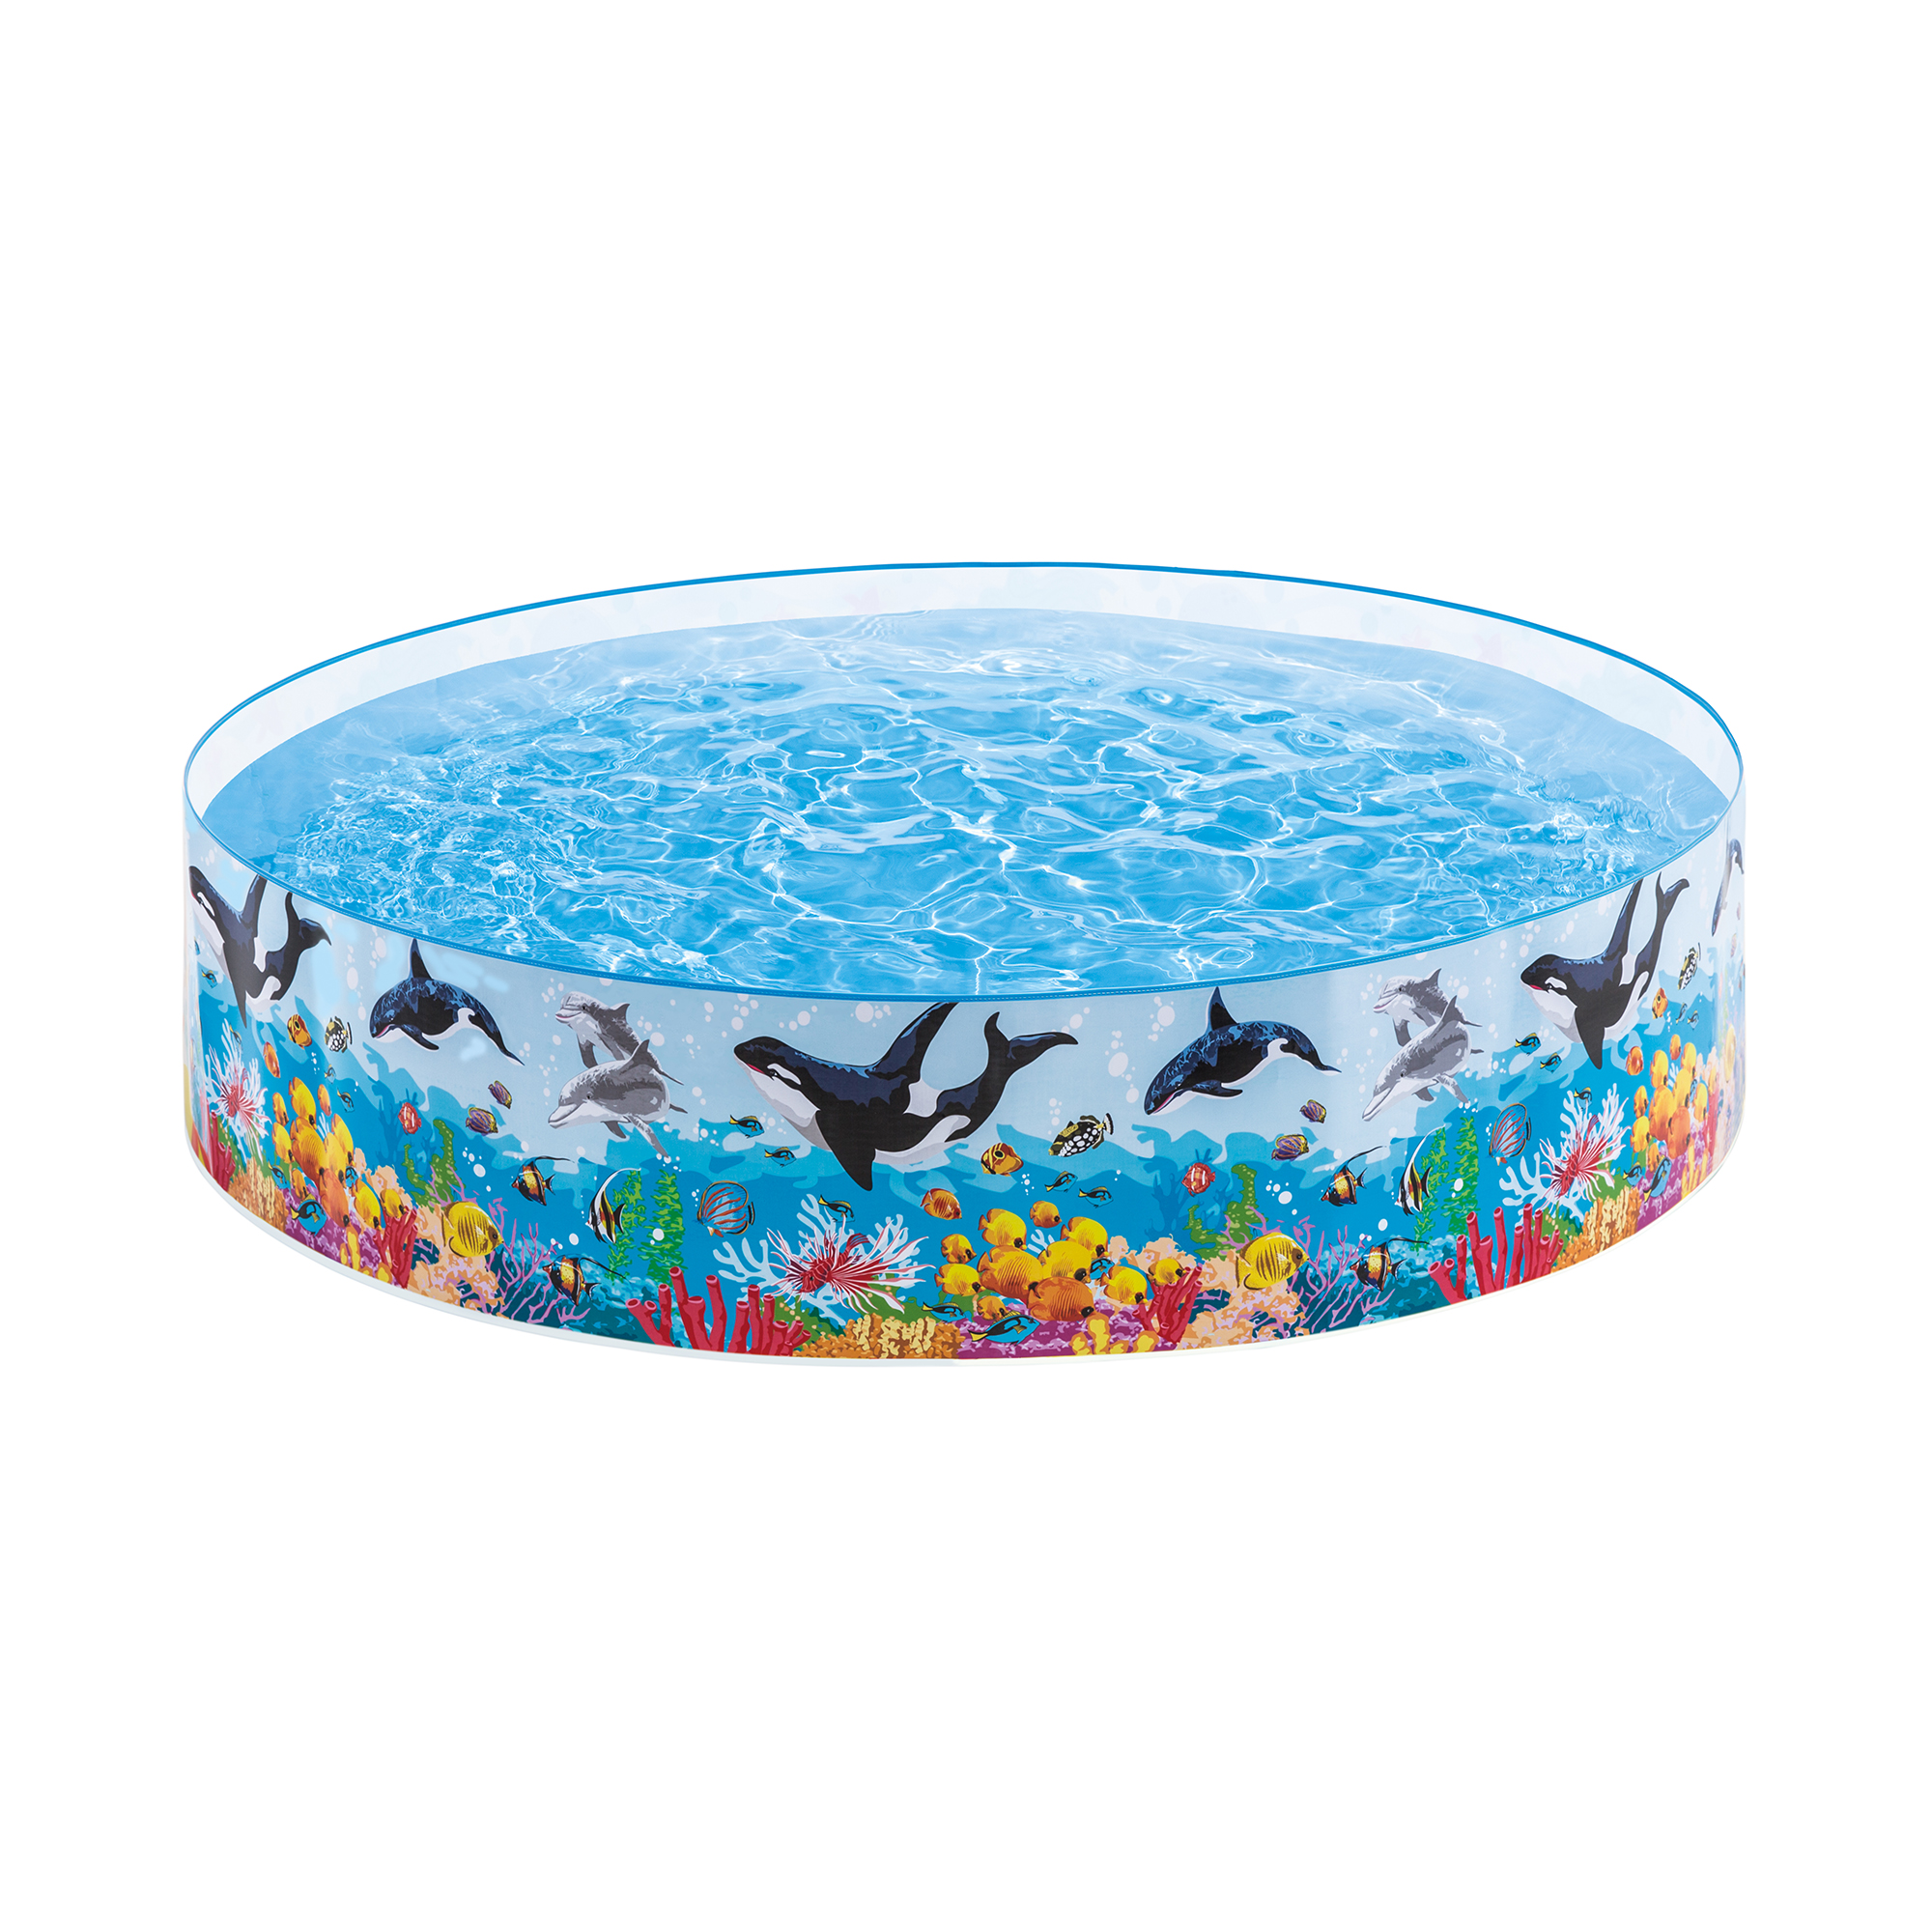 Intex Deep Blue Sea 8FT x 18IN Round Snapset Swimming Pool - image 1 of 5